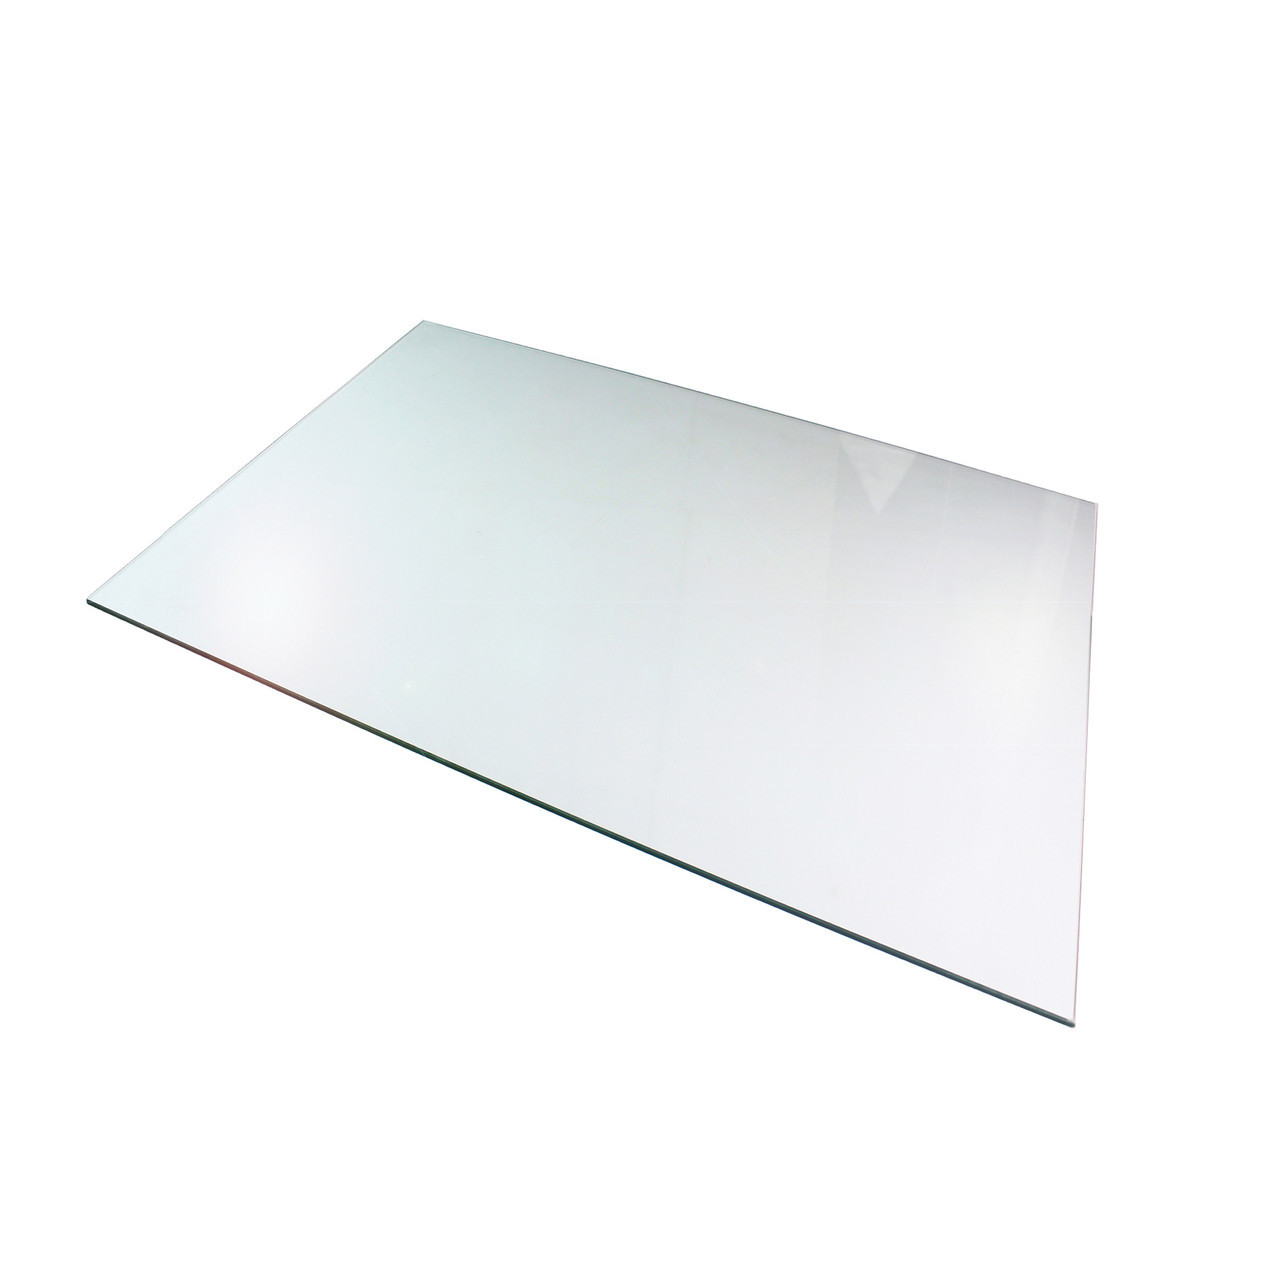 Cleartex Glaciermat Heavy Duty Glass Chair Mat for Hard Floors and